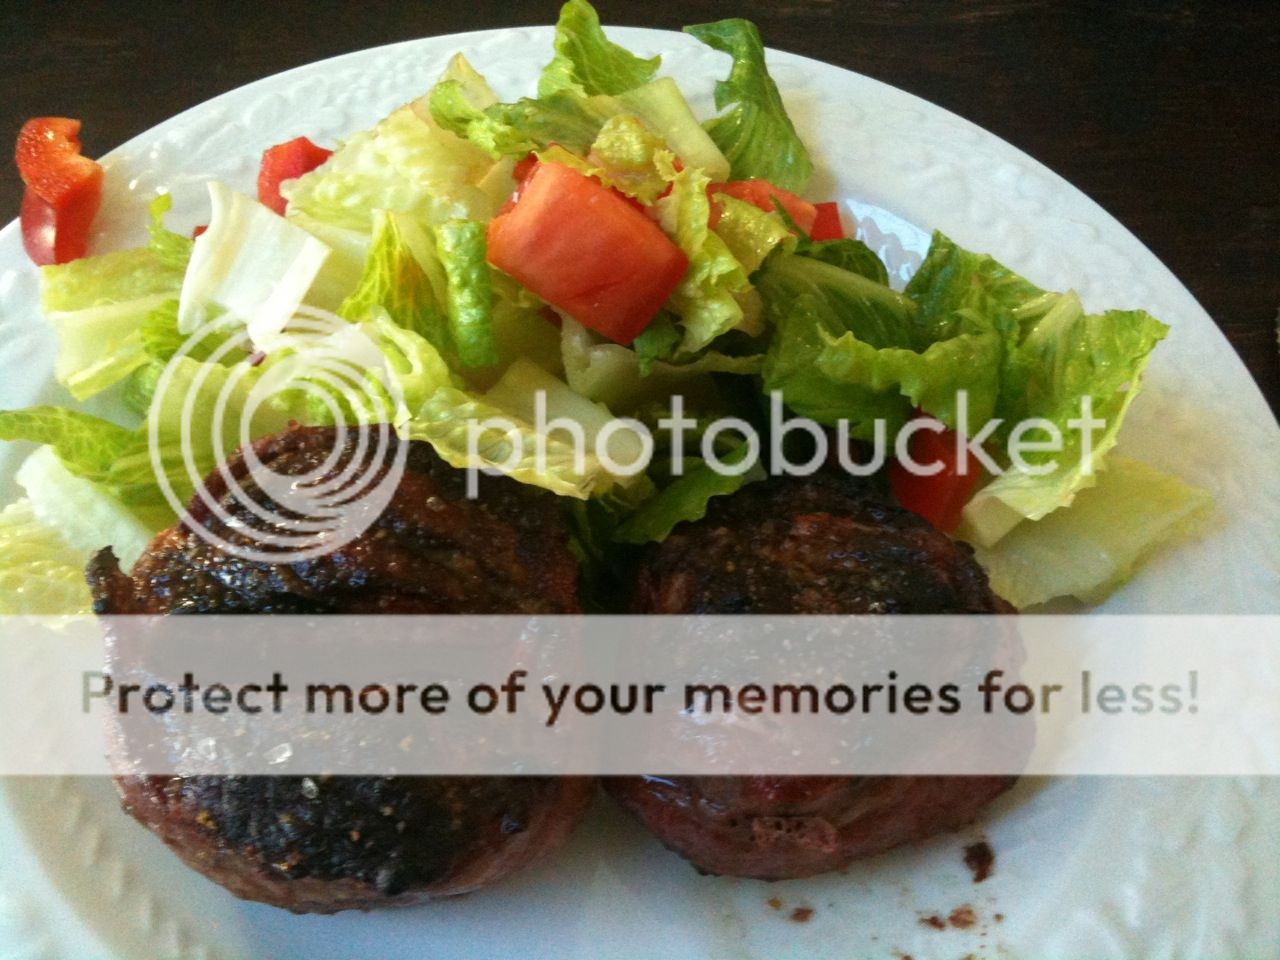 Bacon wrapped filet with a green salad